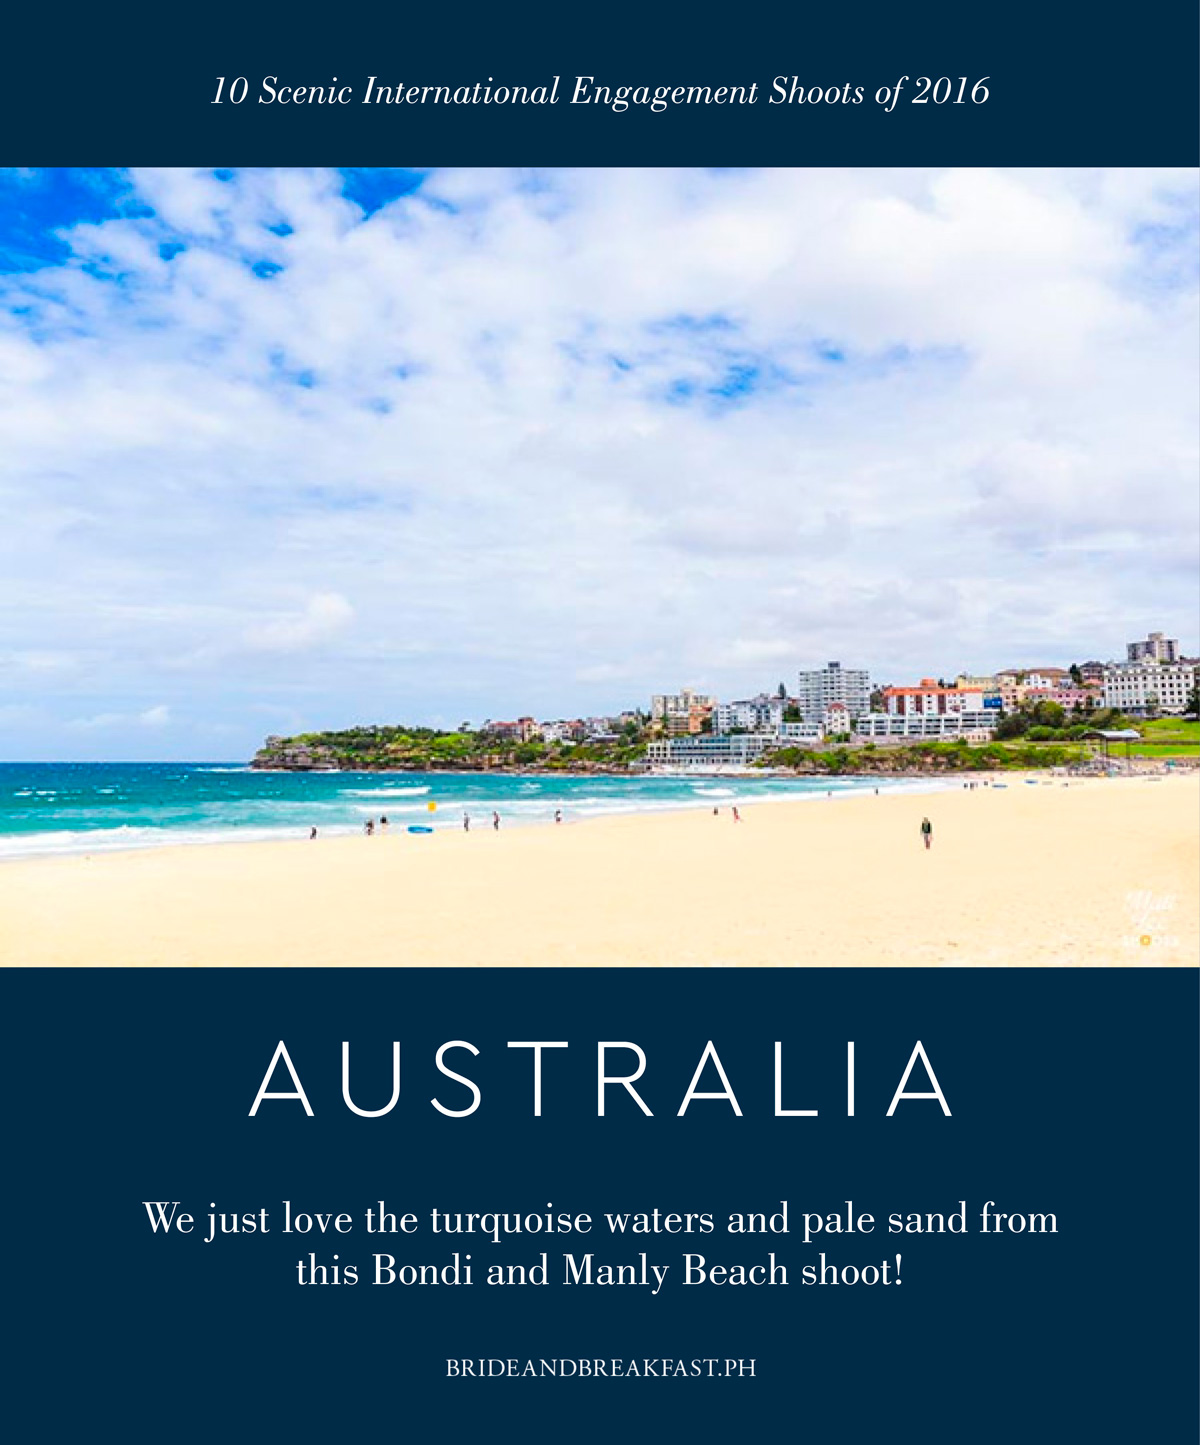 3. Australia We just love the turquoise waters and pale sand from this Bondi and Manly Beach shoot!